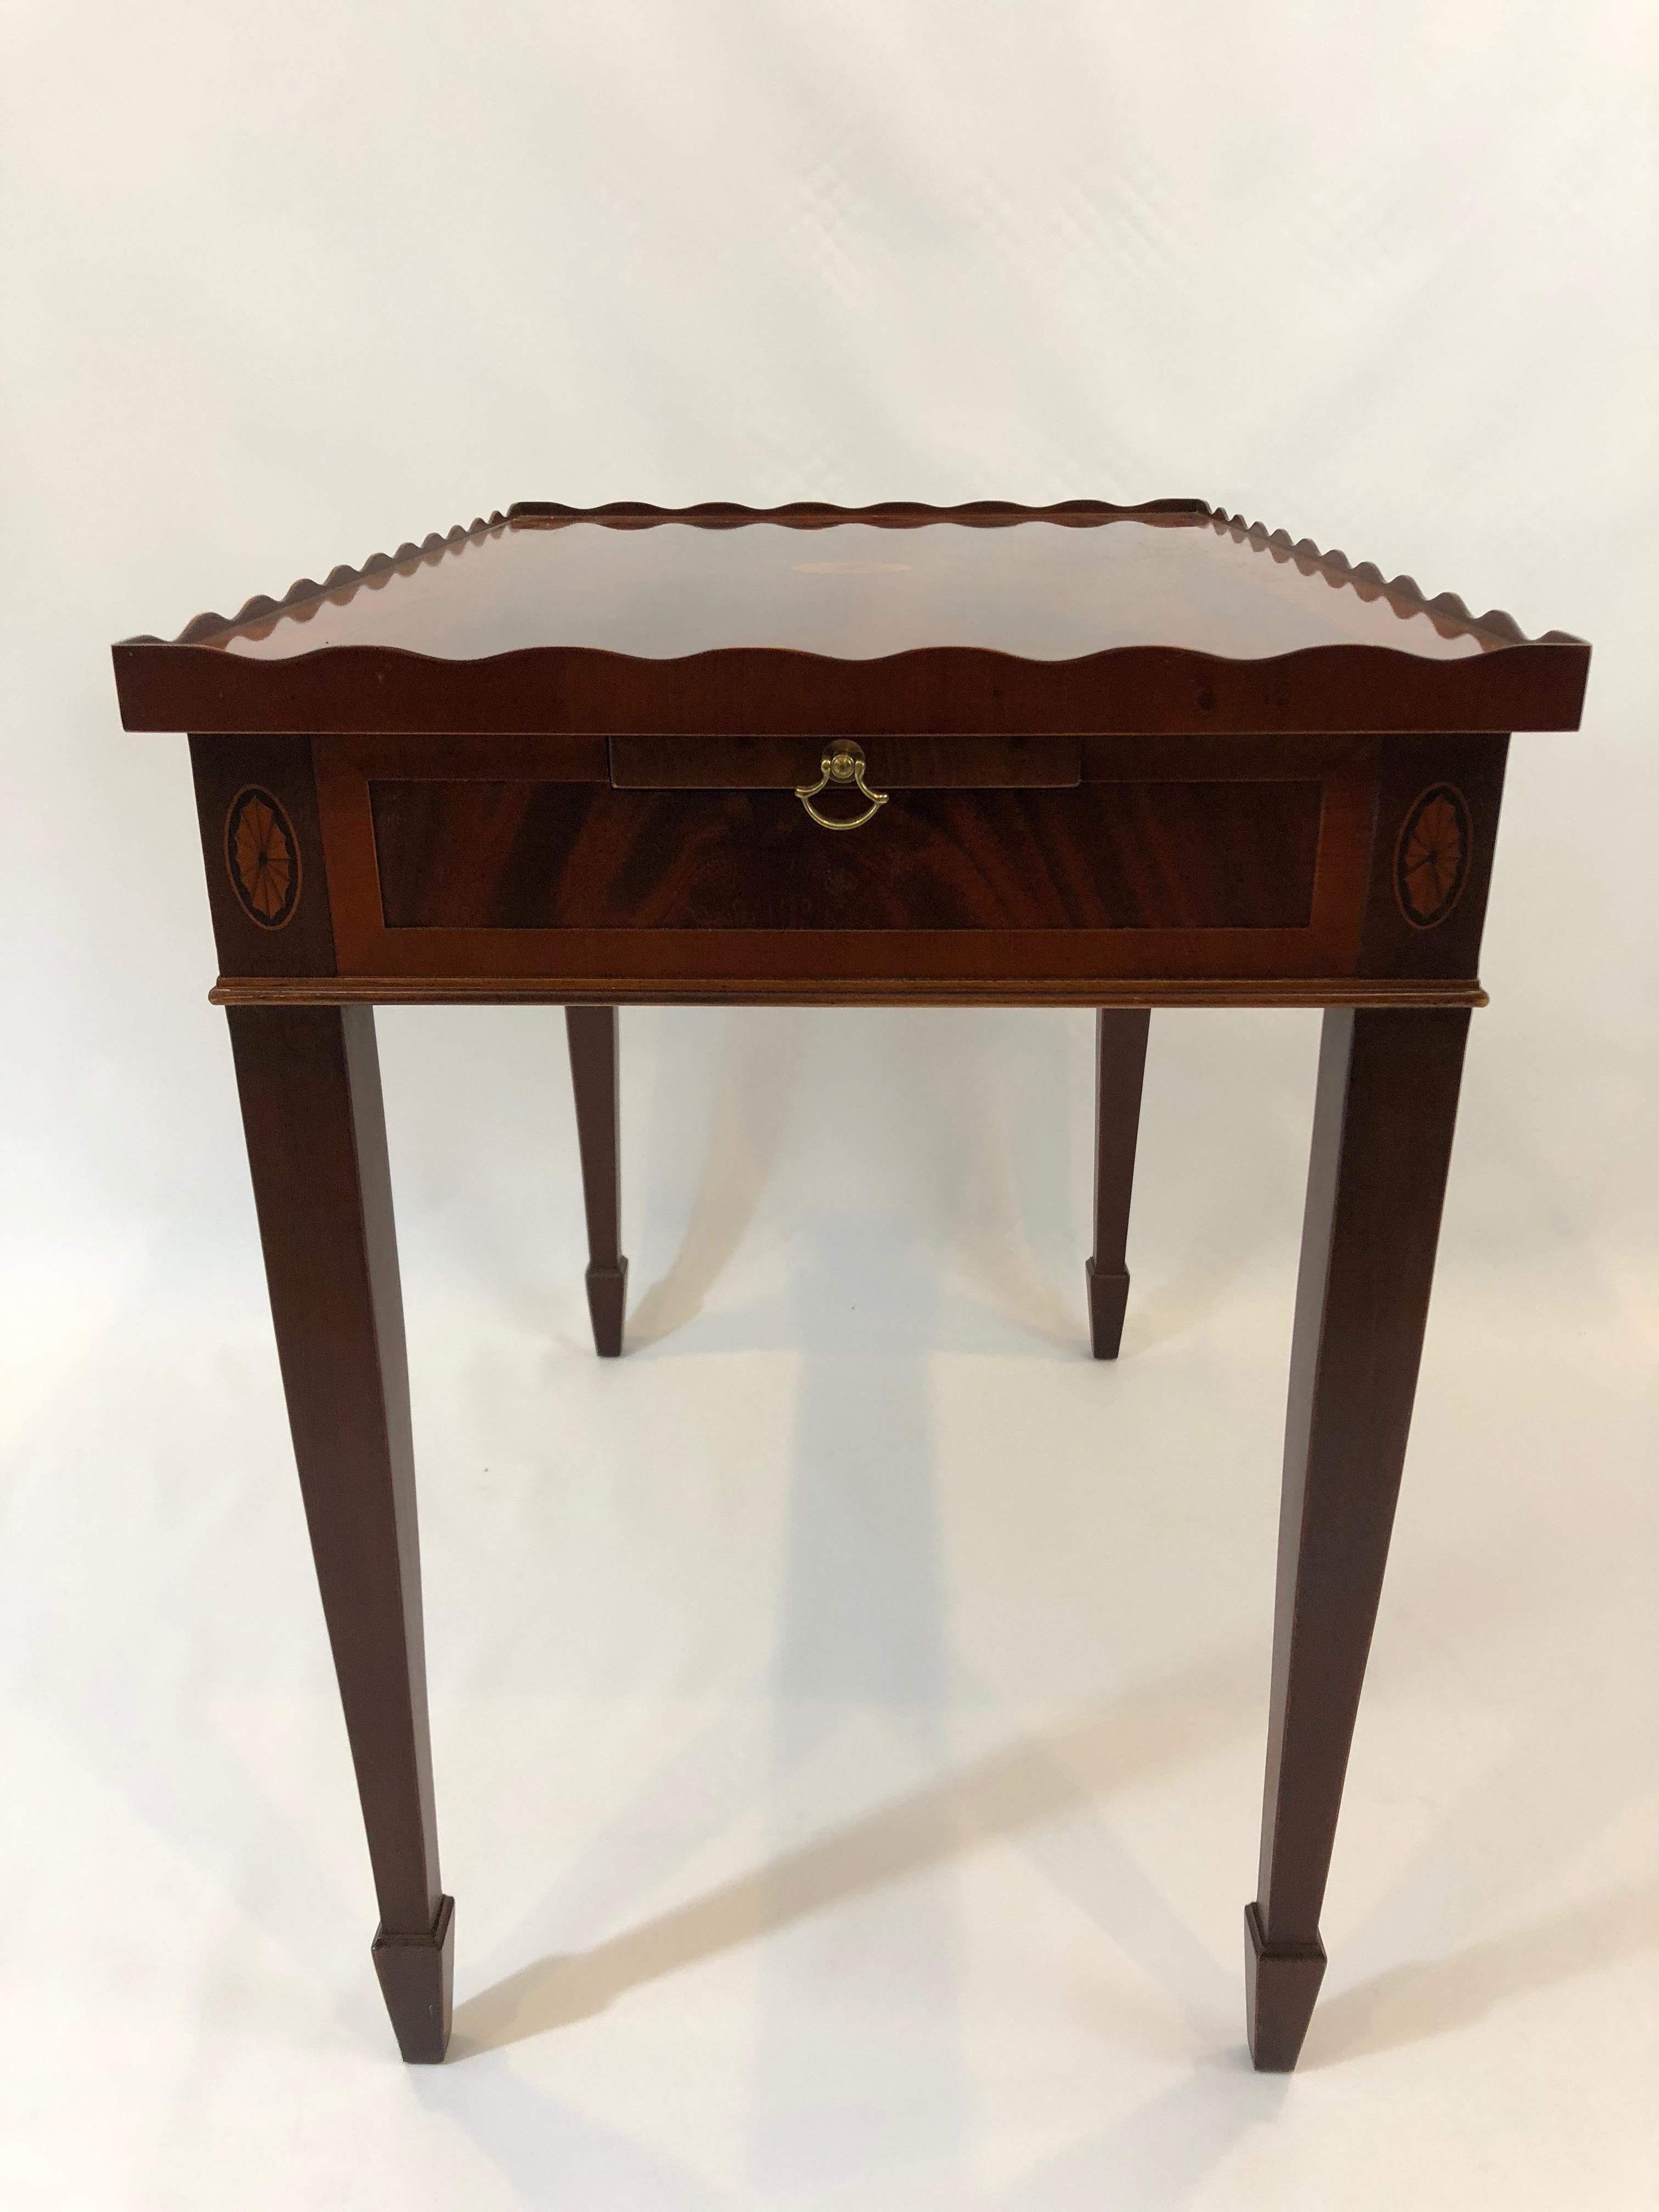 An elegant flame mahogany tea table by Heckman having a pretty scalloped pie crust edge, satinwood and ebony fan inlay, and two slides that pull out at each end.